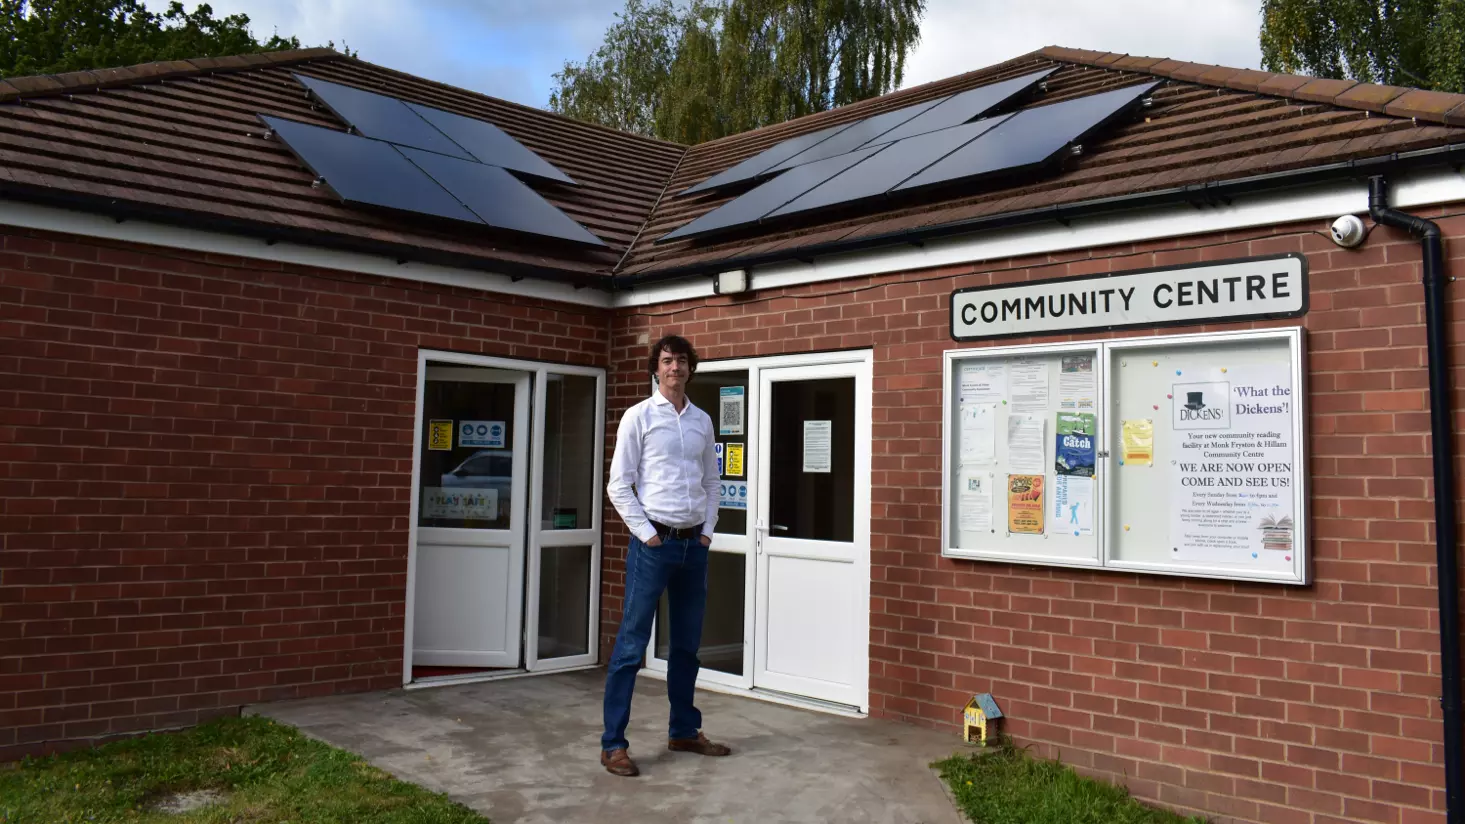 Jon with his insulation and solar PV project for a community centre